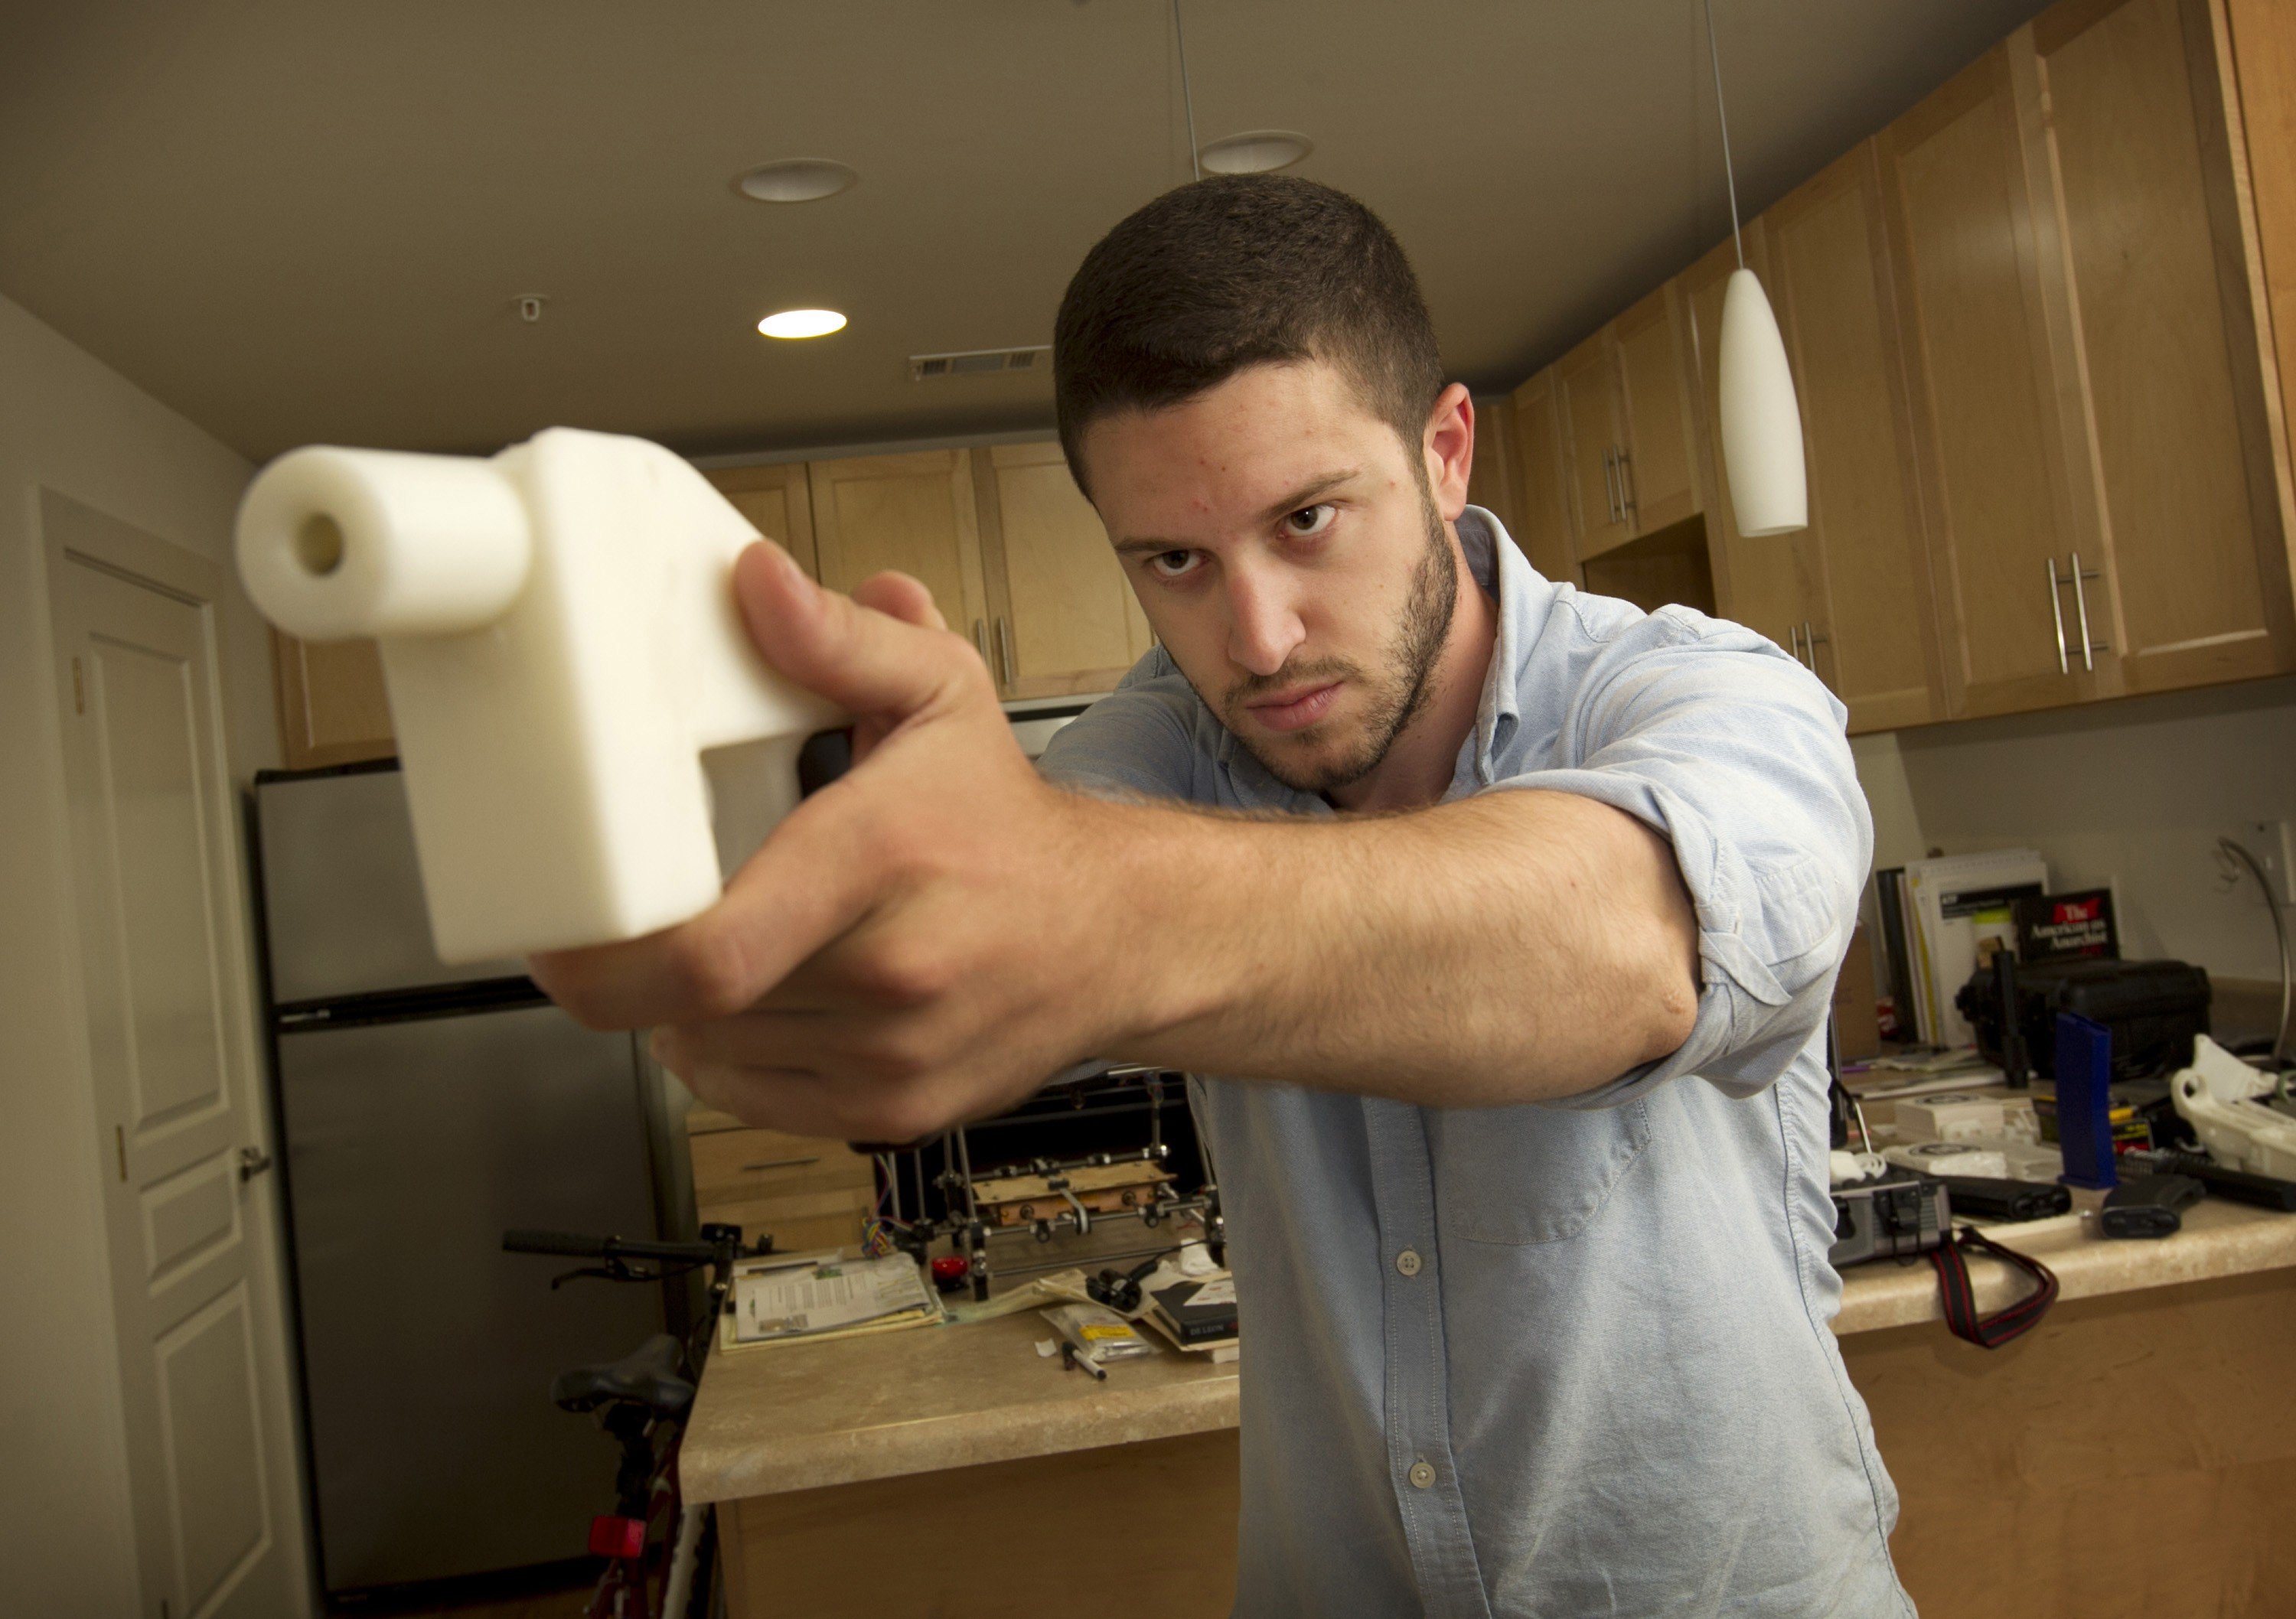 Cody Wilson with a 3D-printed handgun, The Liberator, at his home in Austin, Texas. Photo: TNS